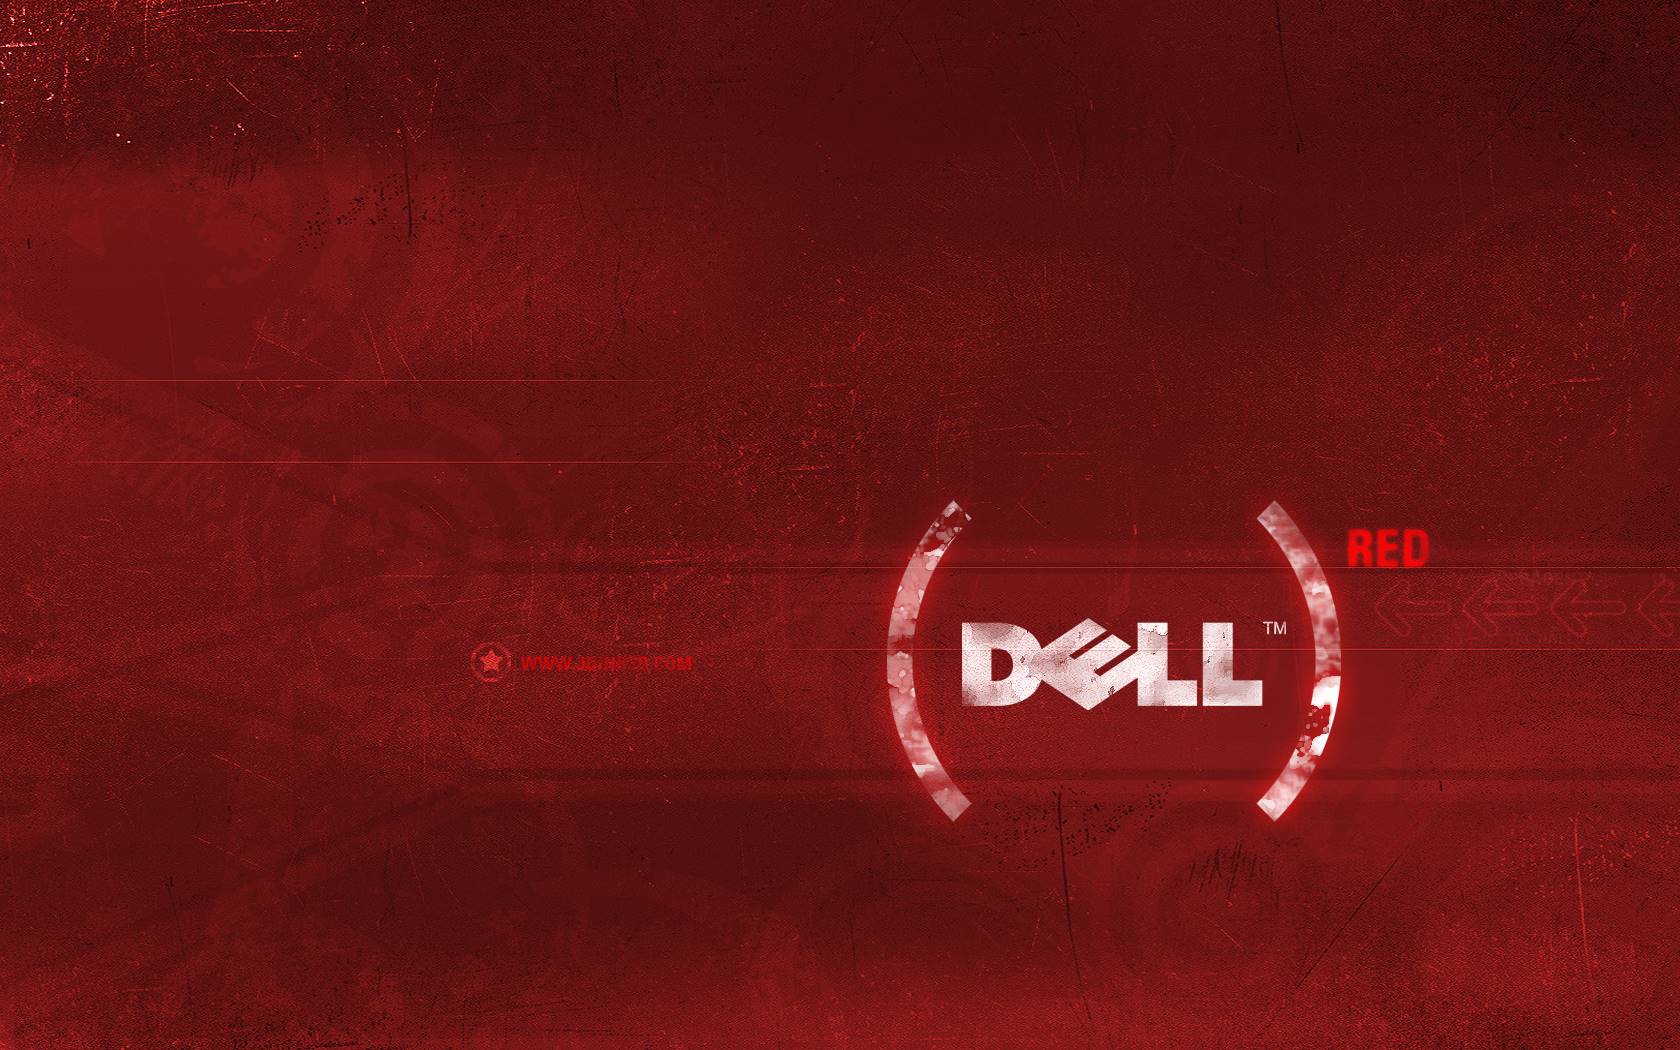 For Edyoutlet HD Dell Background Wallpaper Image Windows